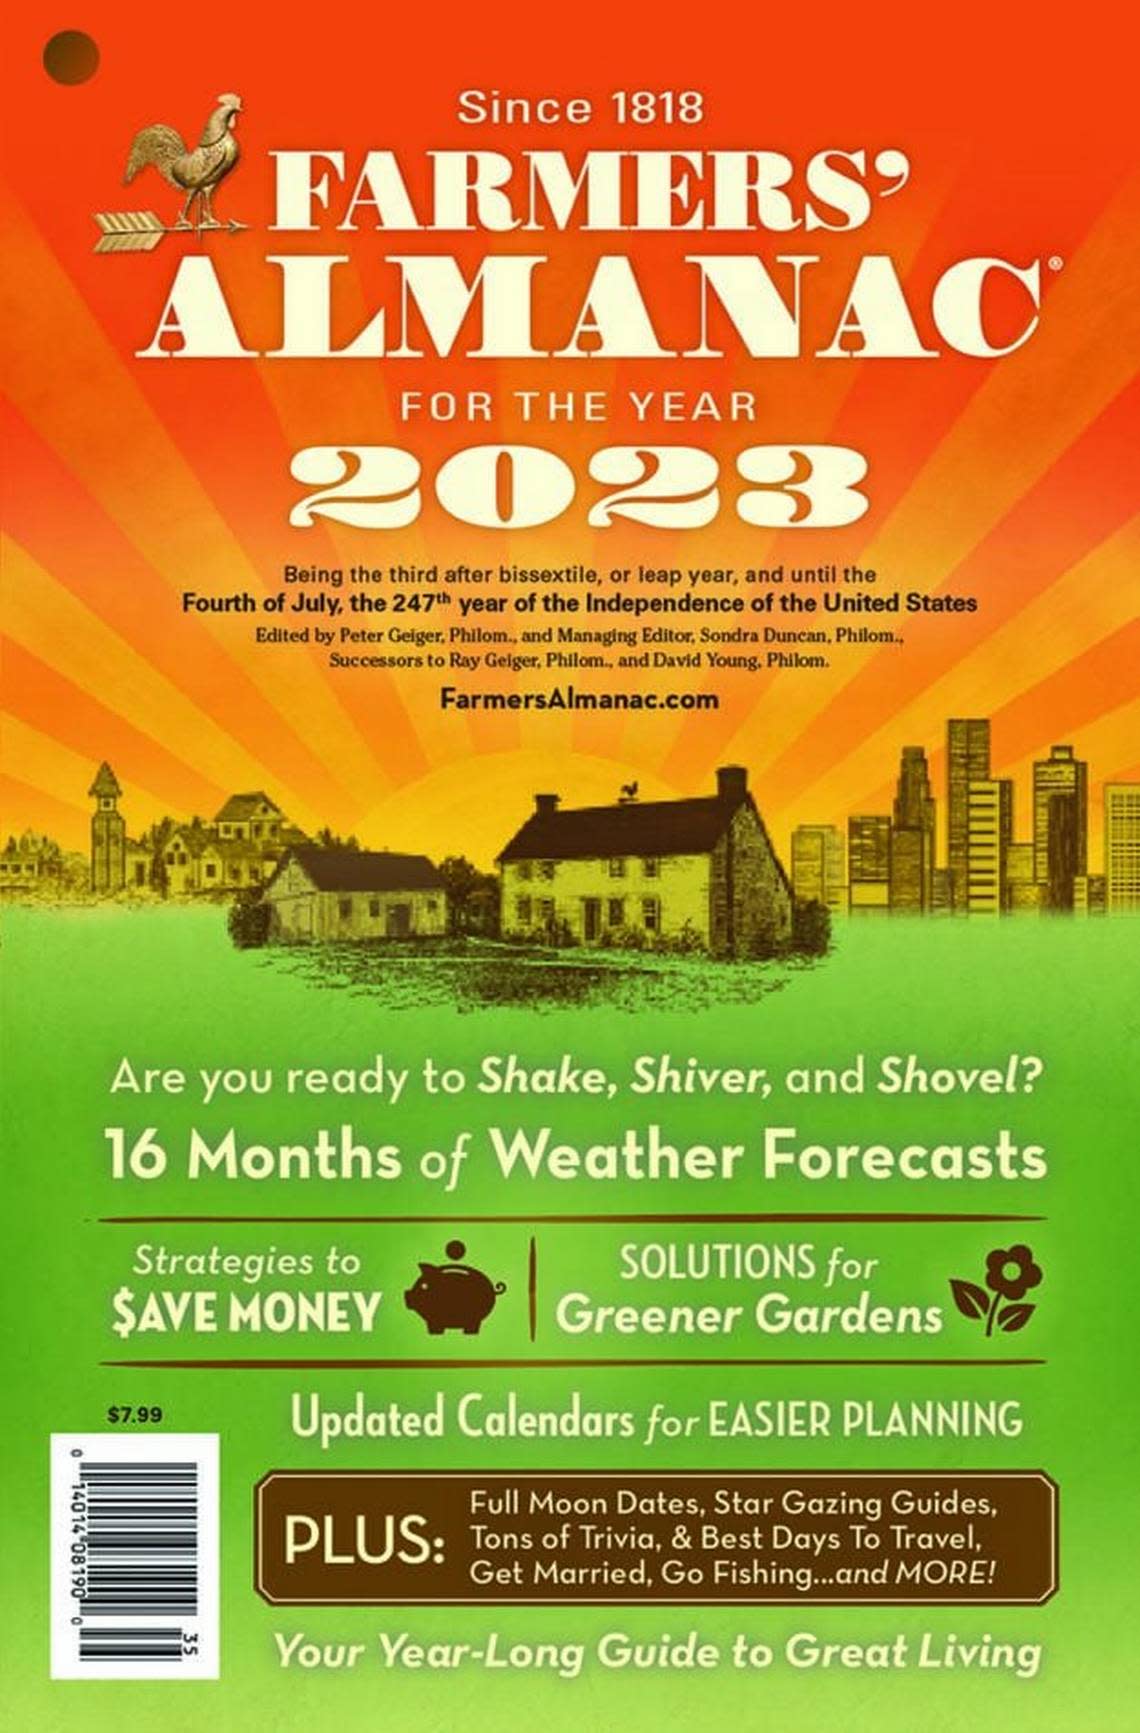 The cover of the new 2023 edition of Farmers’ Almanac that was released to stores in August 2022.